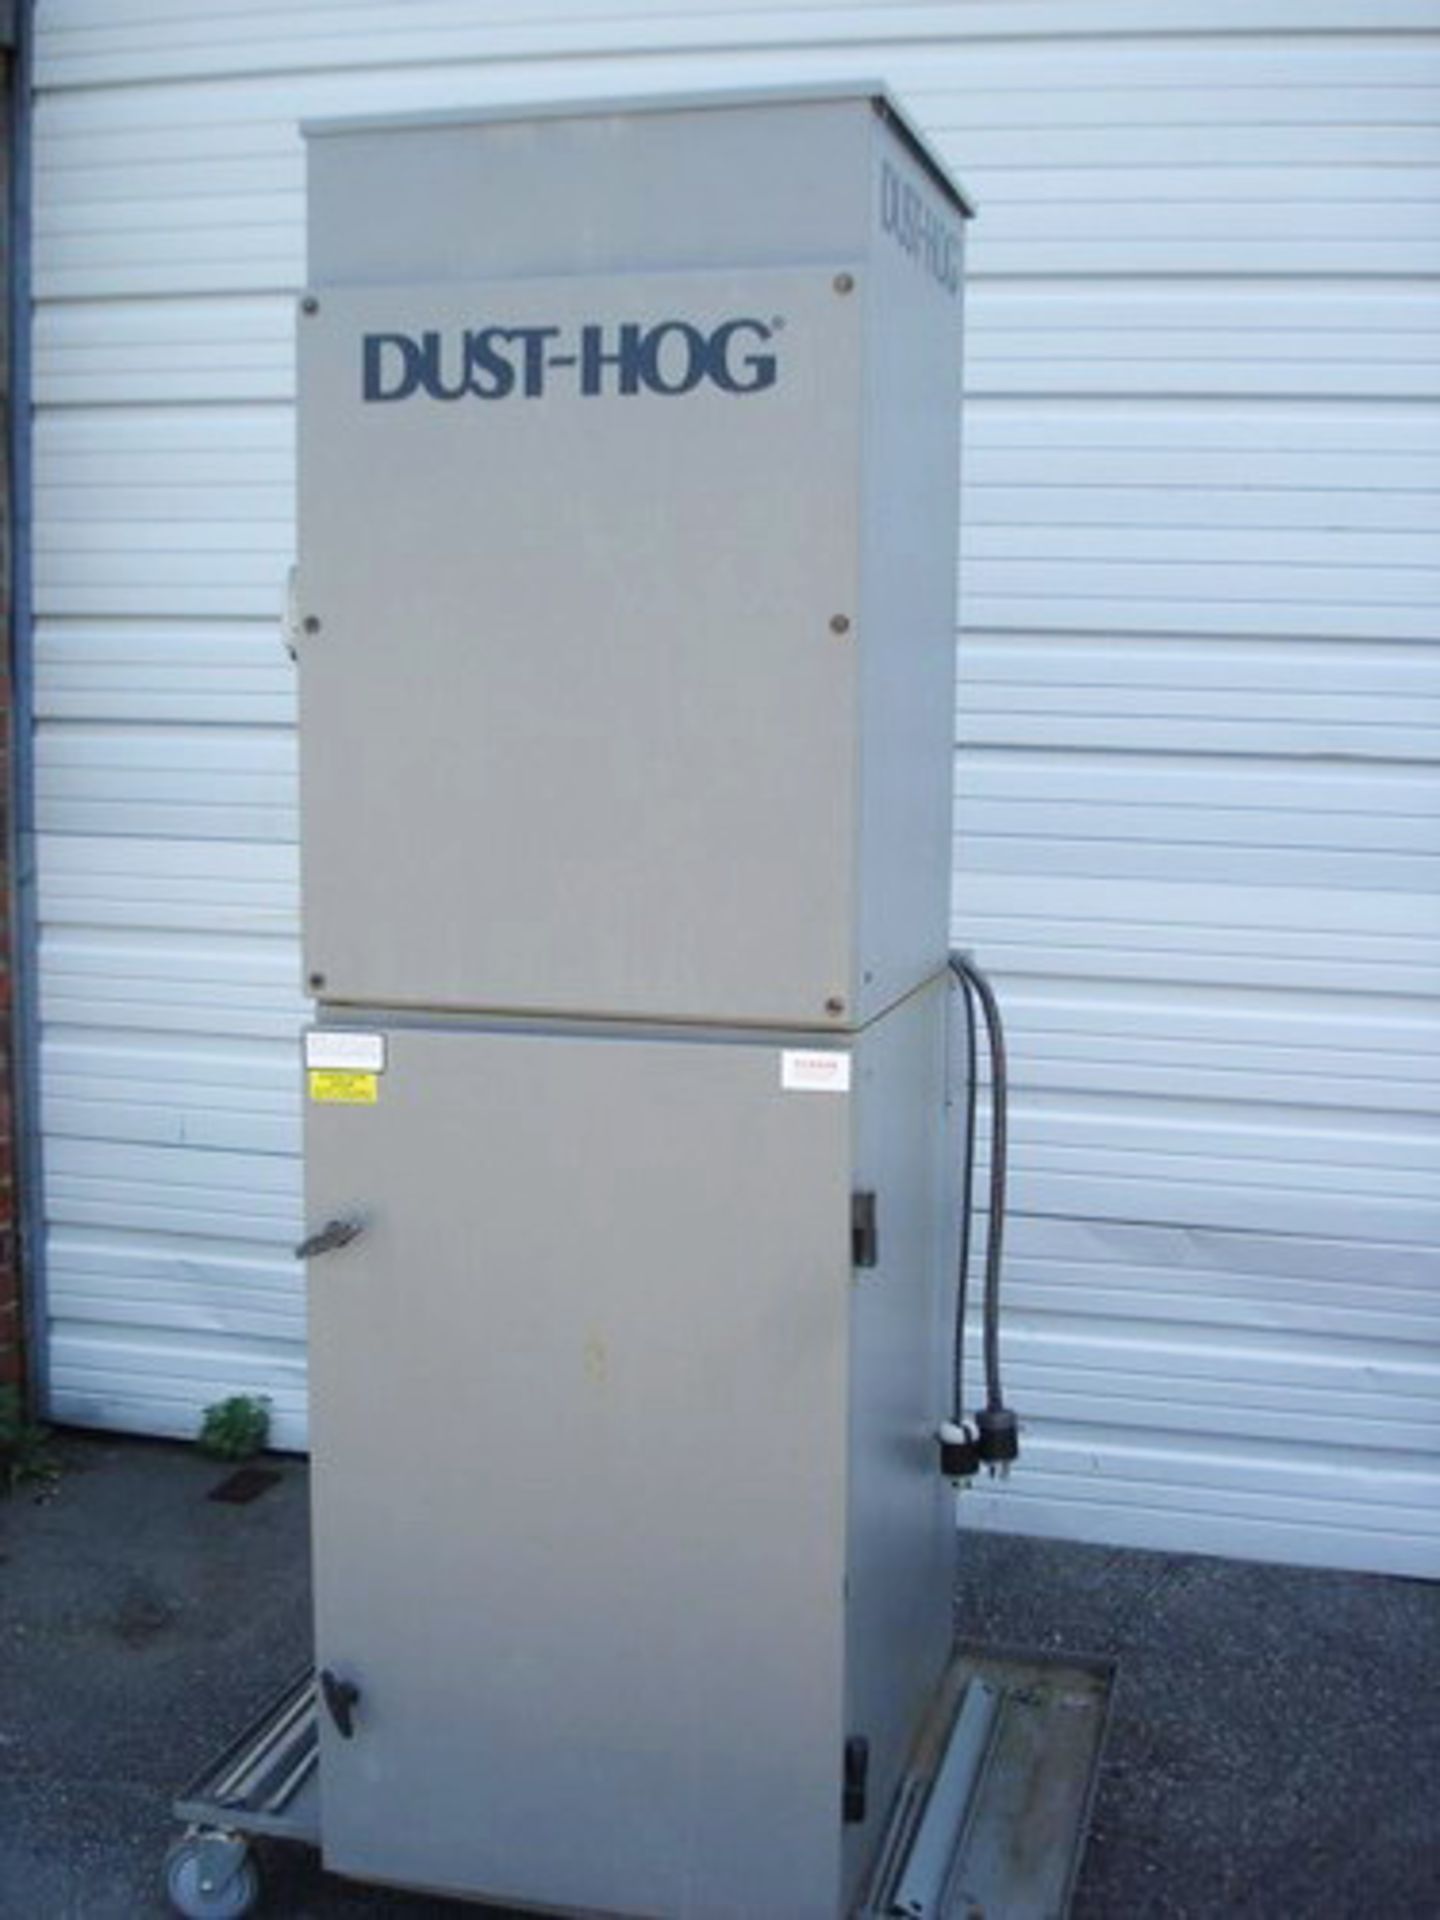 United Air Specialists (UAS) Dusthog Dust Collection System, Model Dusthog SC1700, S/N 60046570